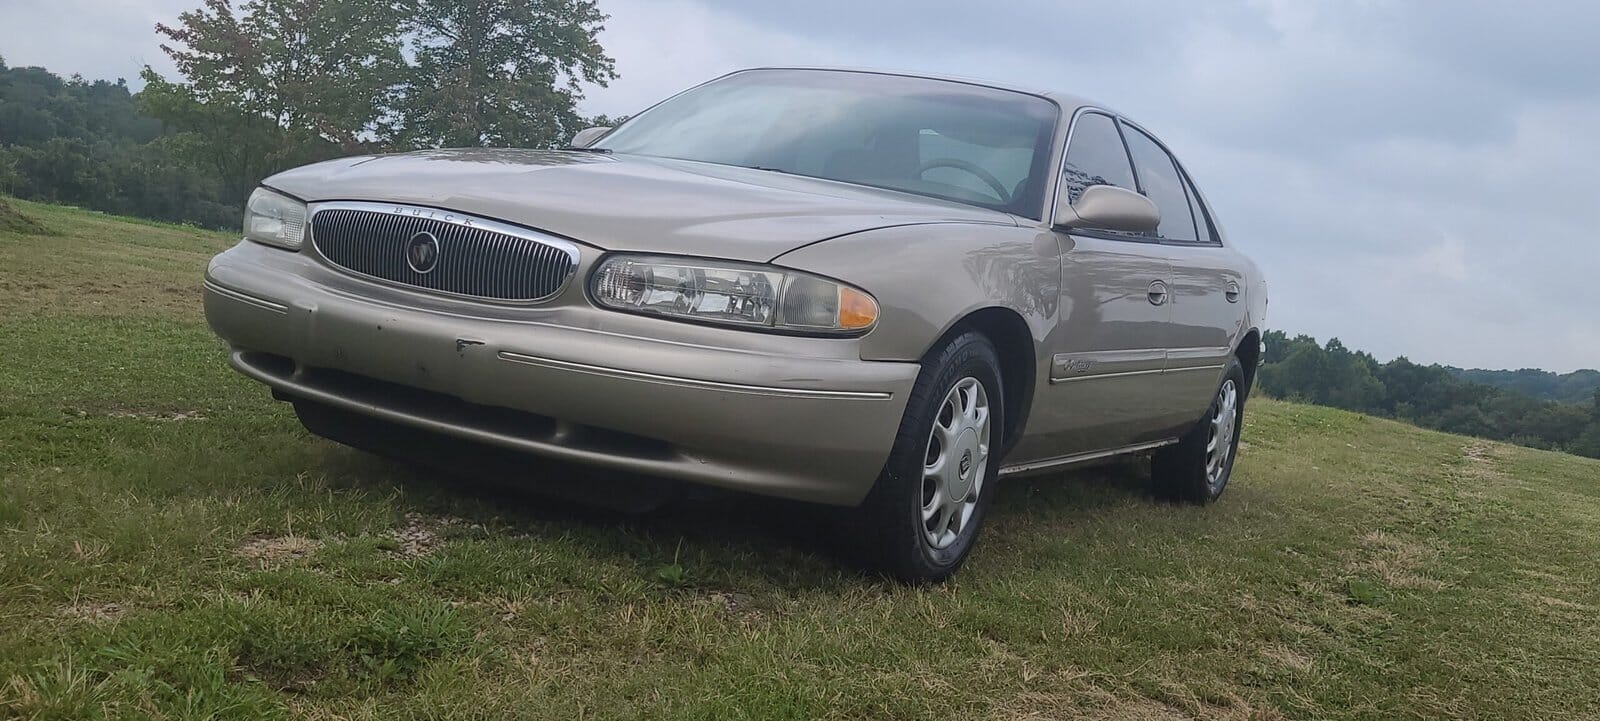 Read more about the article **SOLD**2001 Buick Century**SOLD**